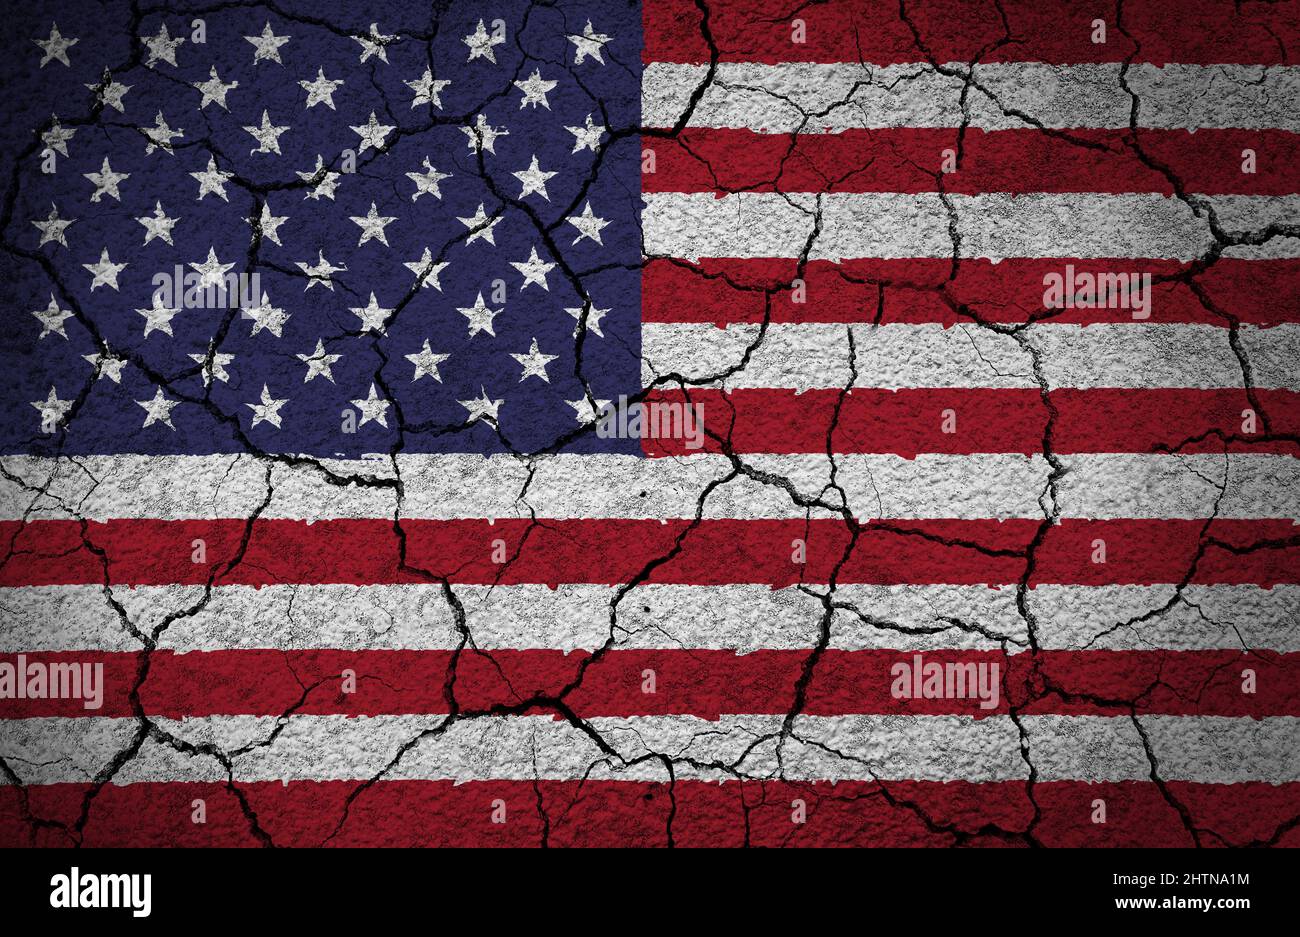 US American flag painted on a cracked and grunge concrete wall. Concept of a country in crisis, danger, torn, broken. Stock Photo